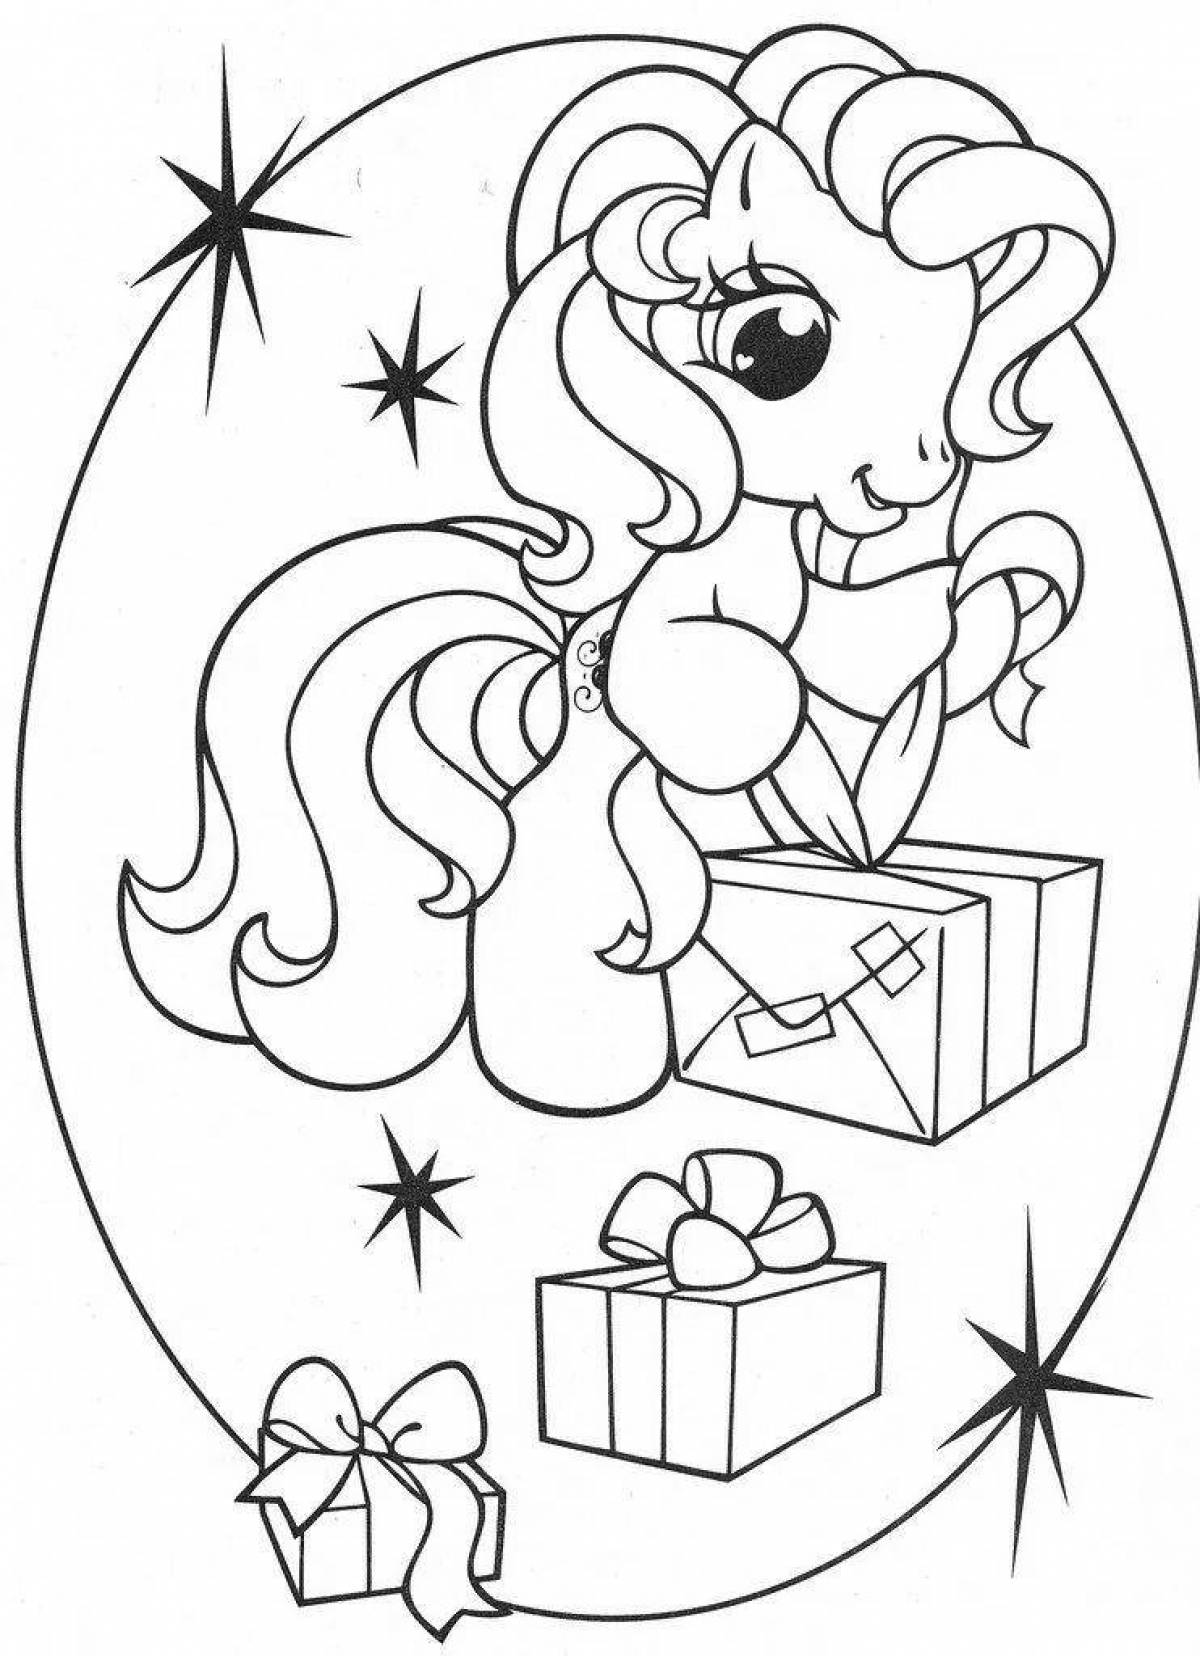 Colourful Christmas pony coloring book